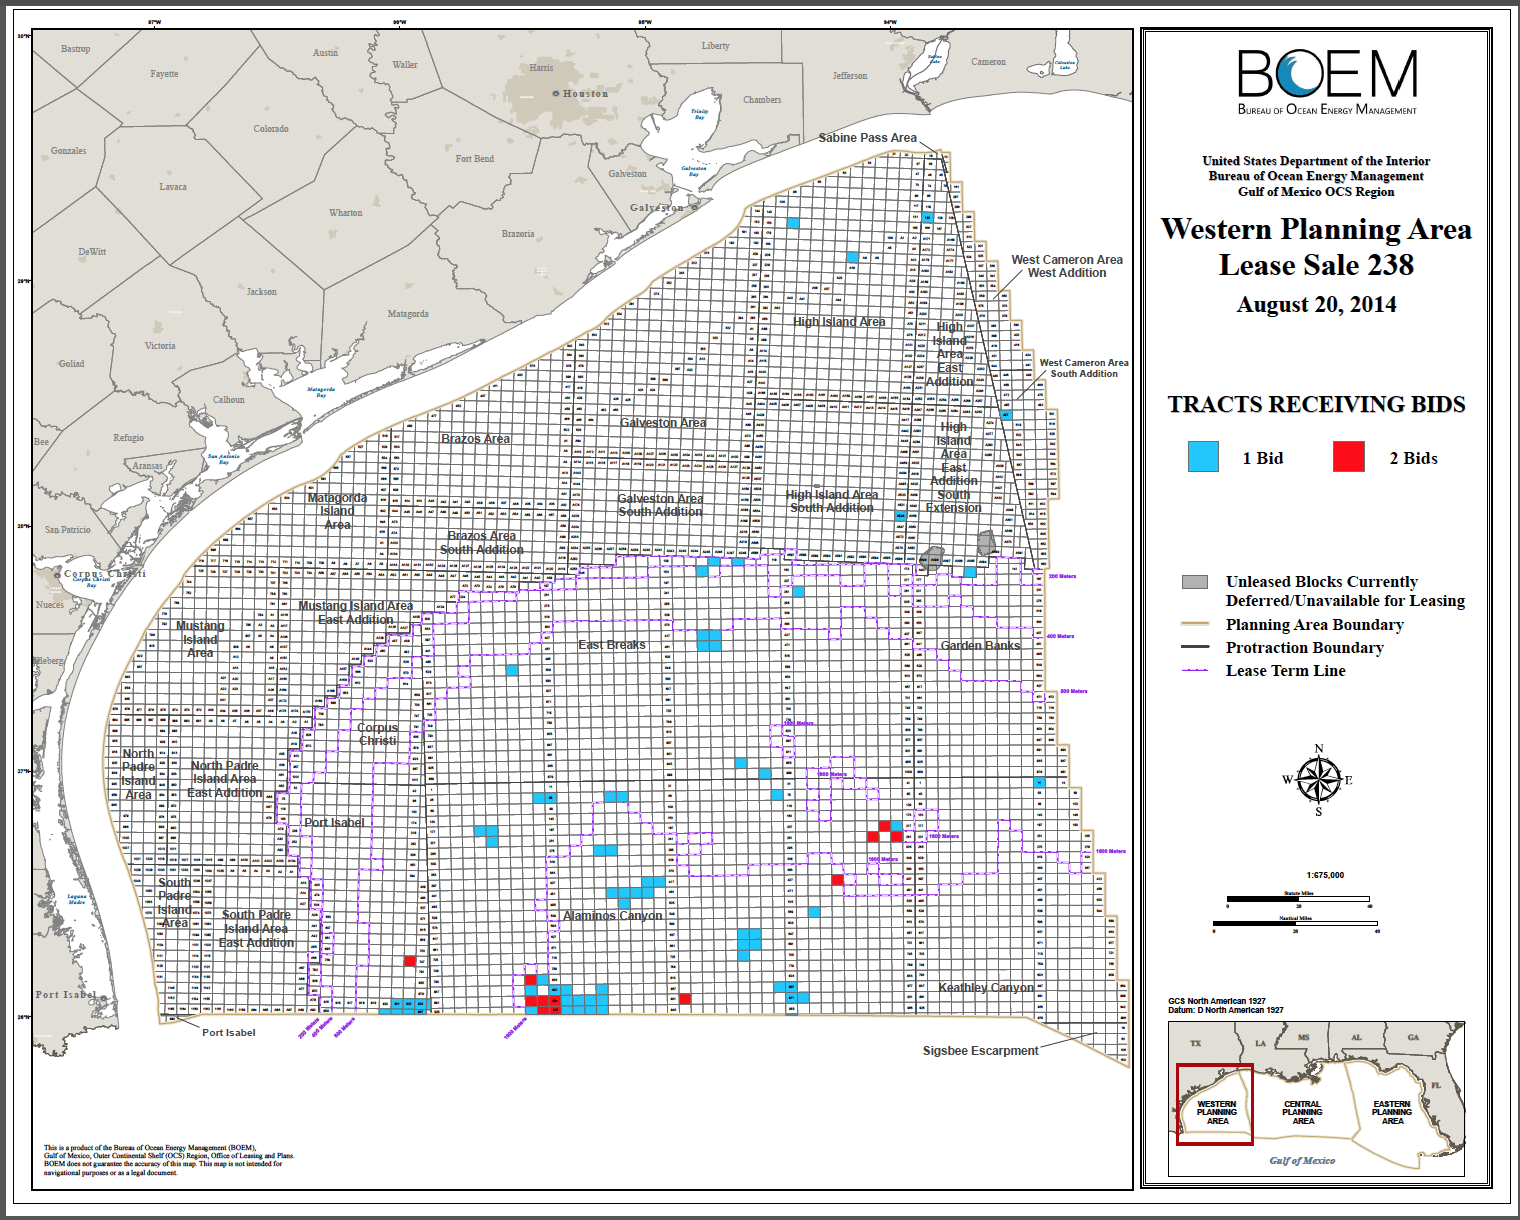 Gulf of Mexico Oil Lease Map August 2014